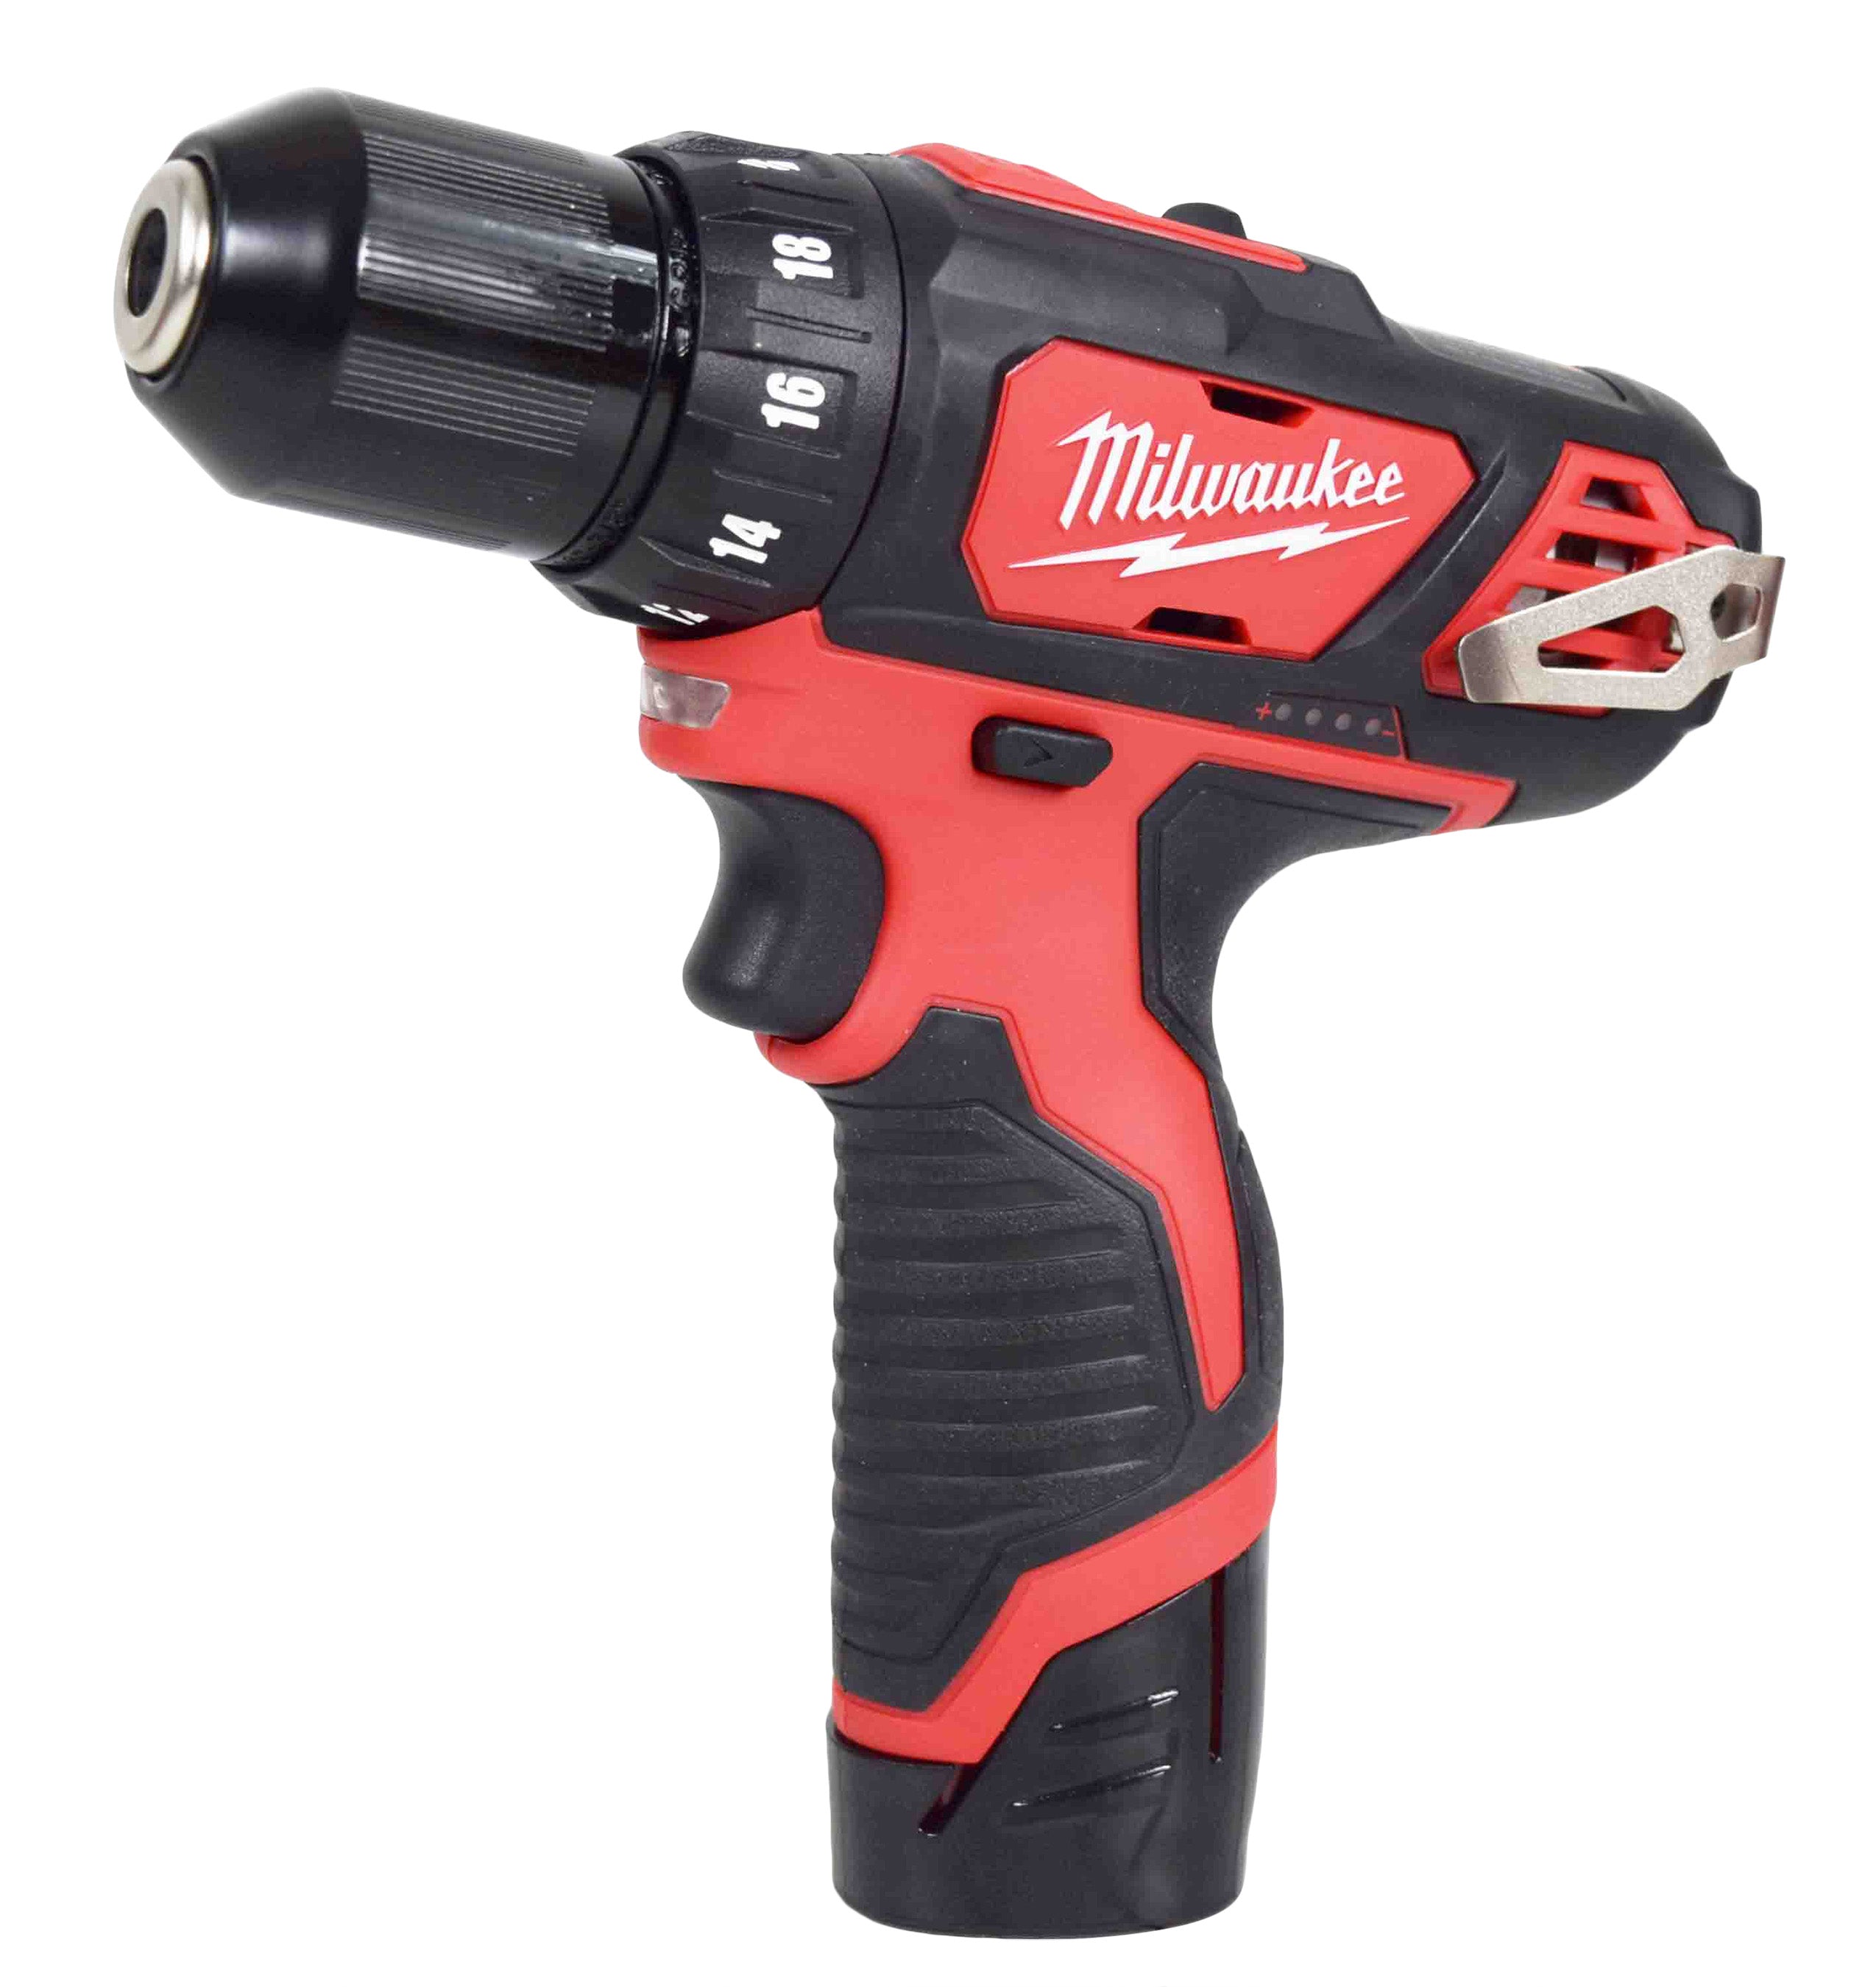 Milwaukee 2494-22 M12 Cordless Combination 3/8" Drill / Driver and 1/4" Hex Impact Driver Dual Power Tool Kit (2 Lithium Ion Batteries, Charger, and Bag Included)